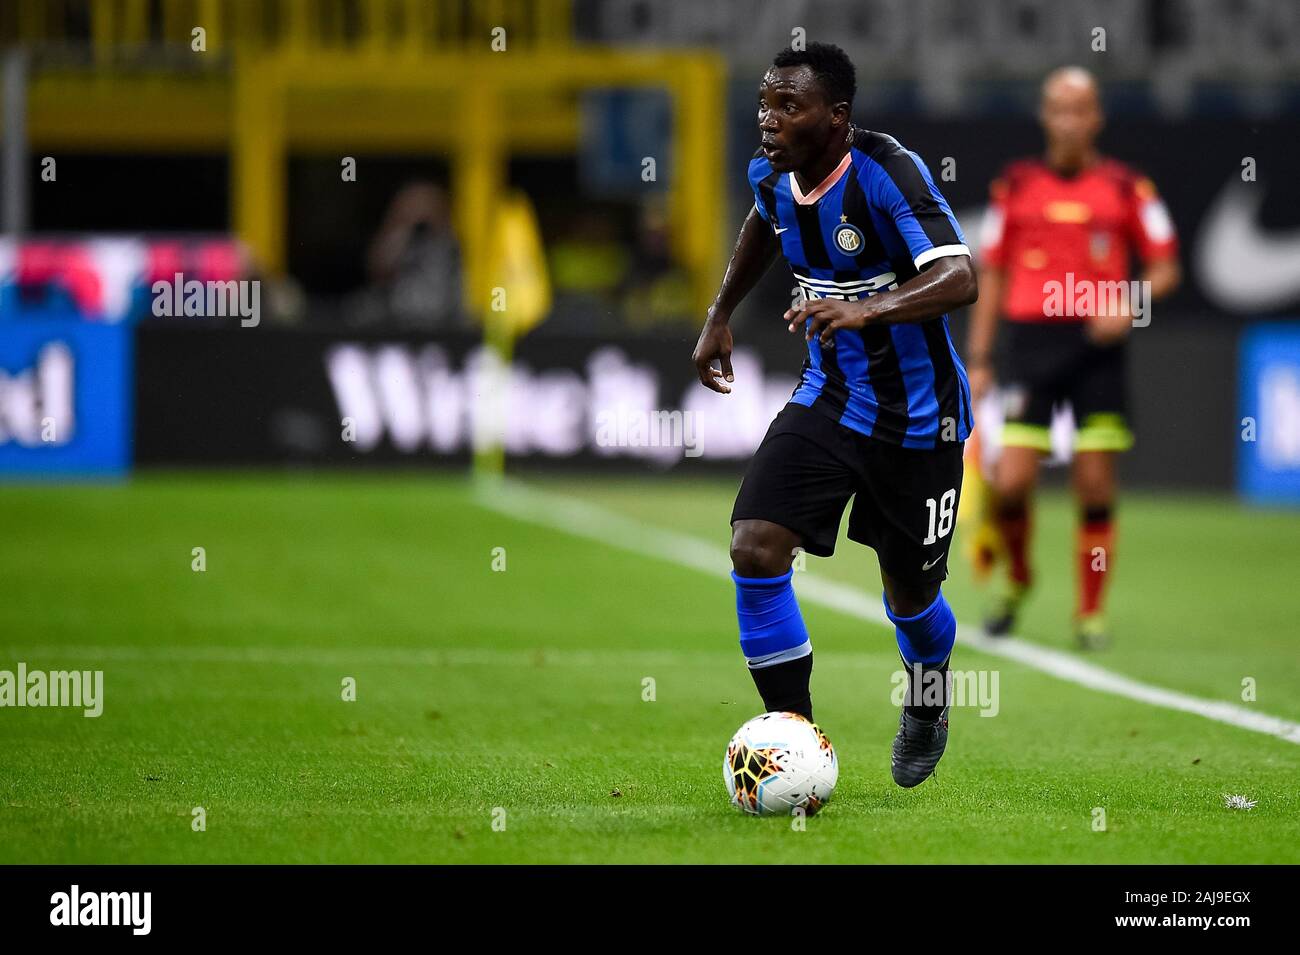 Milan, Italy. 26 August, 2019: Kwadwo Asamoah of FC Internazionale in action during the Serie A football match between FC Internazionale and US Lecce. FC Internazionale won 4-0 over US Lecce. Credit: Nicolò Campo/Alamy Live News Stock Photo